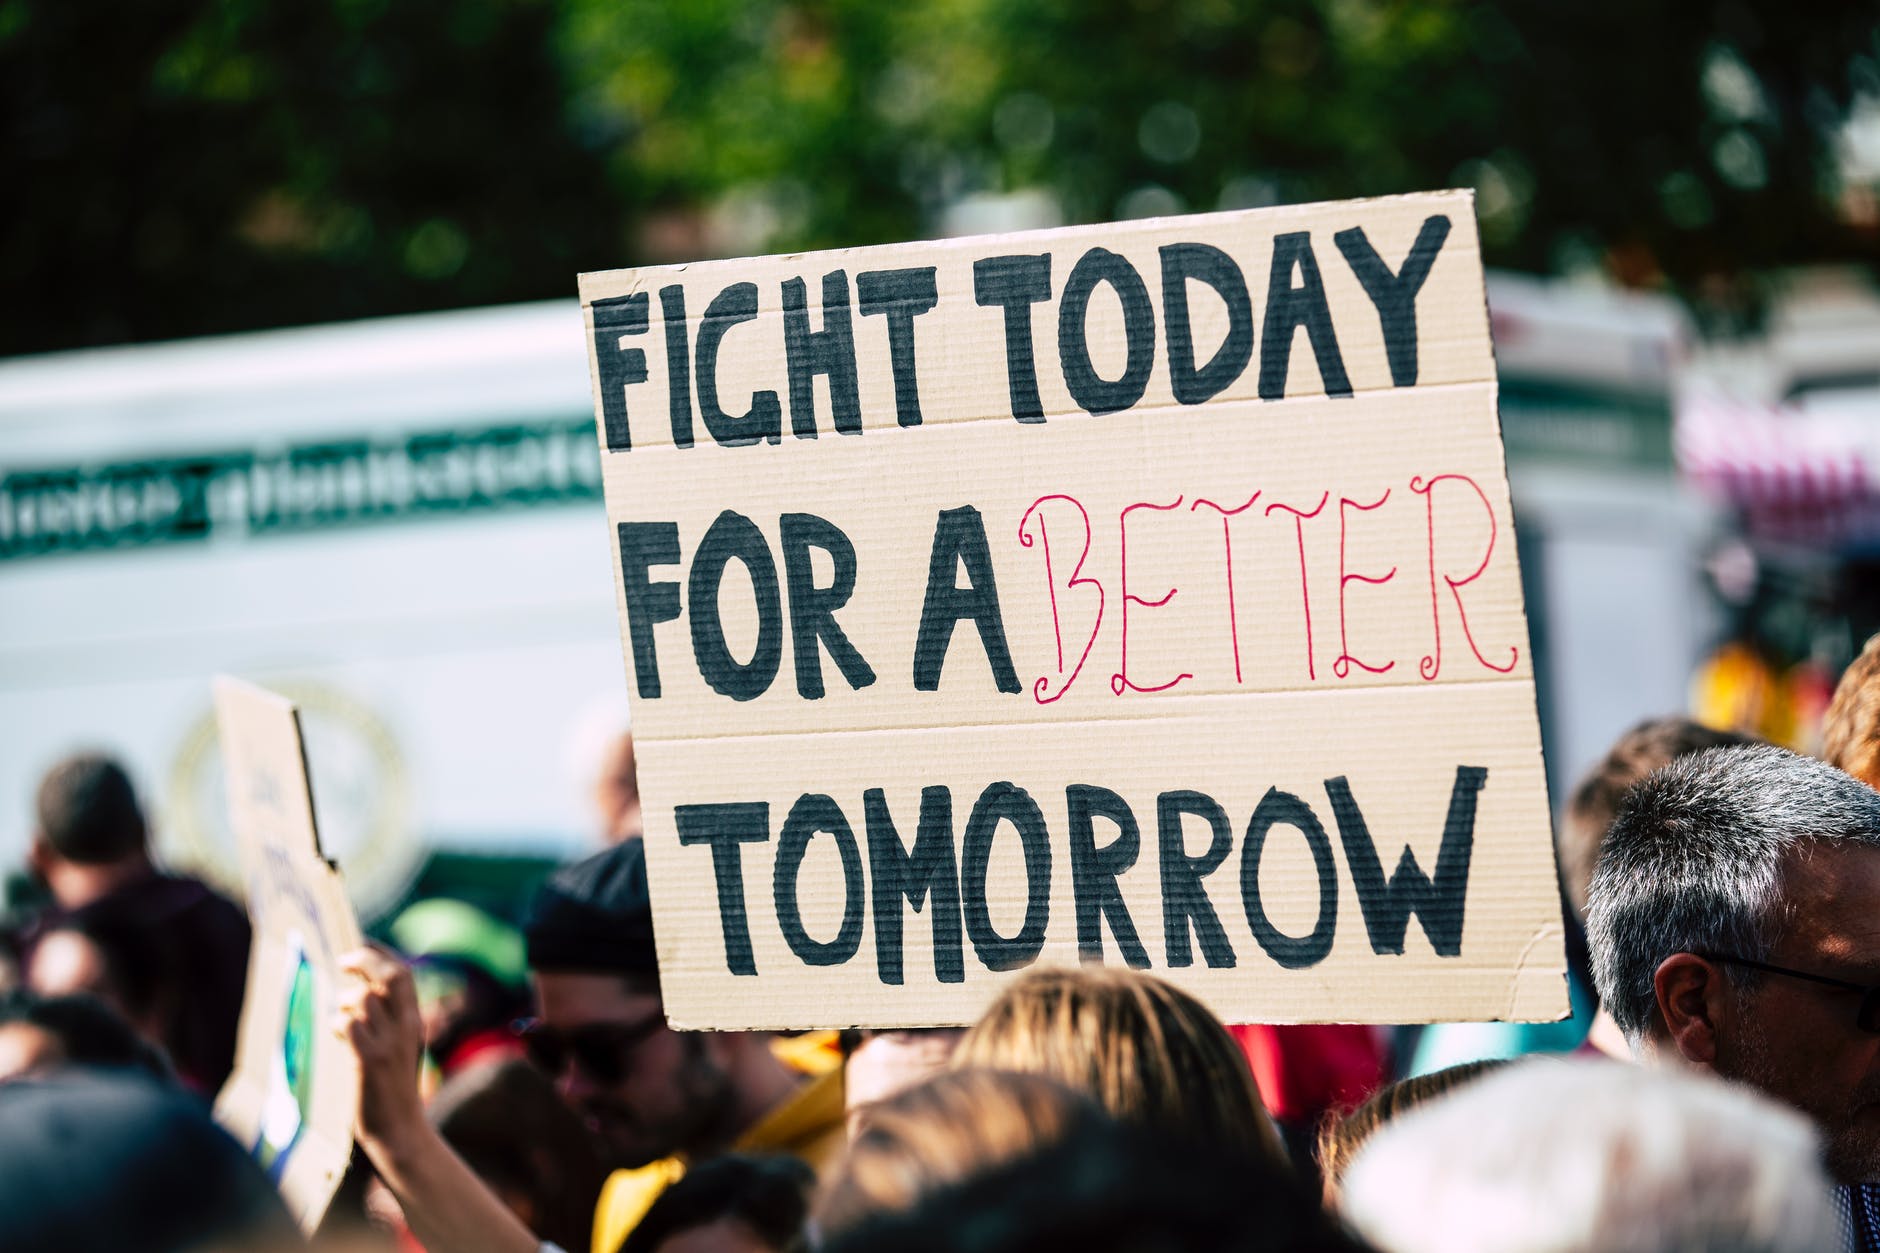 protest-sign-fight-today-for-better-tomorrow